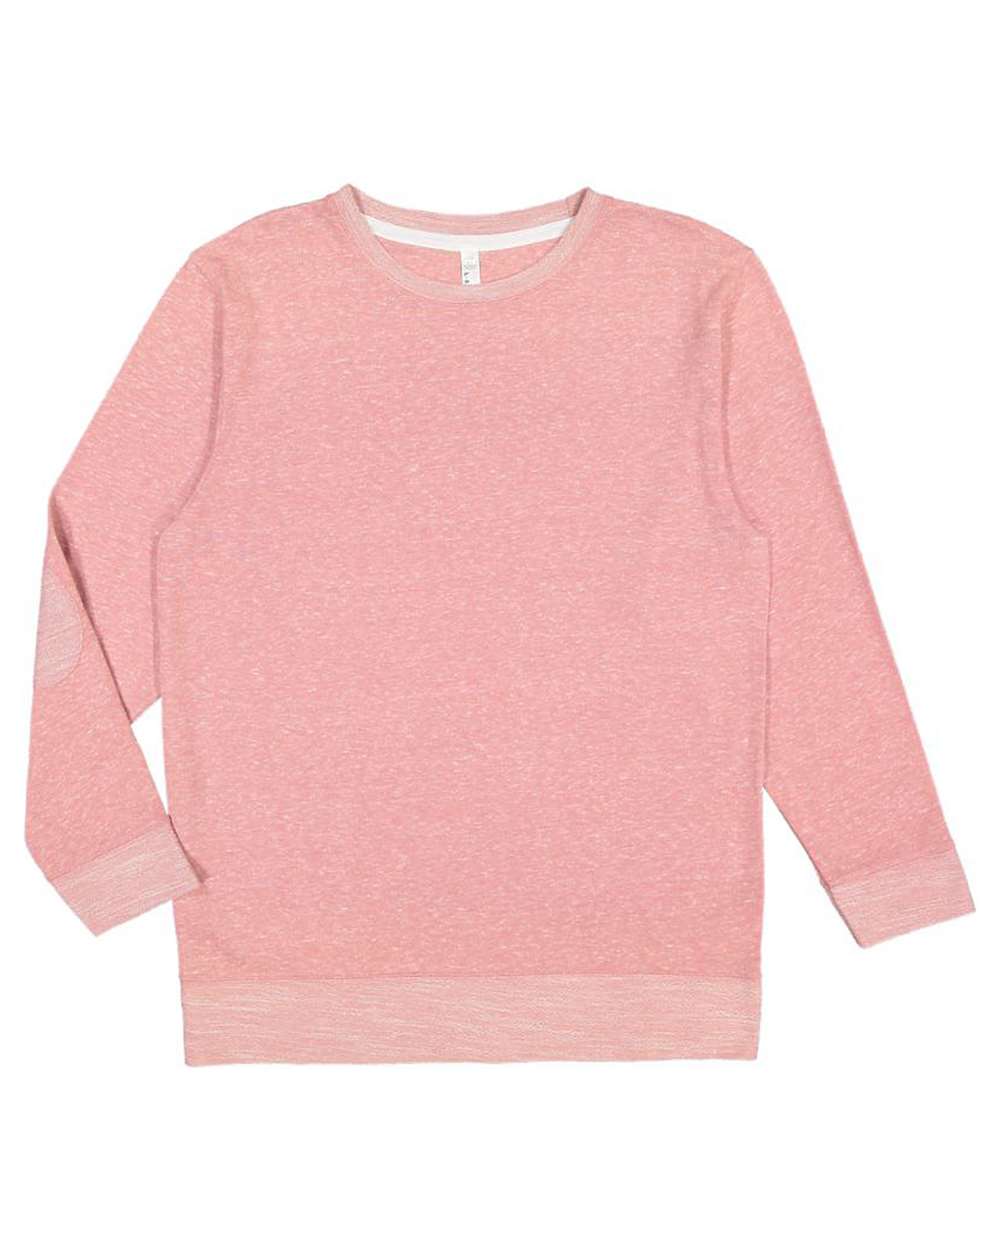 Mauvelous Melange French Terry Pullover Top - T9542MV